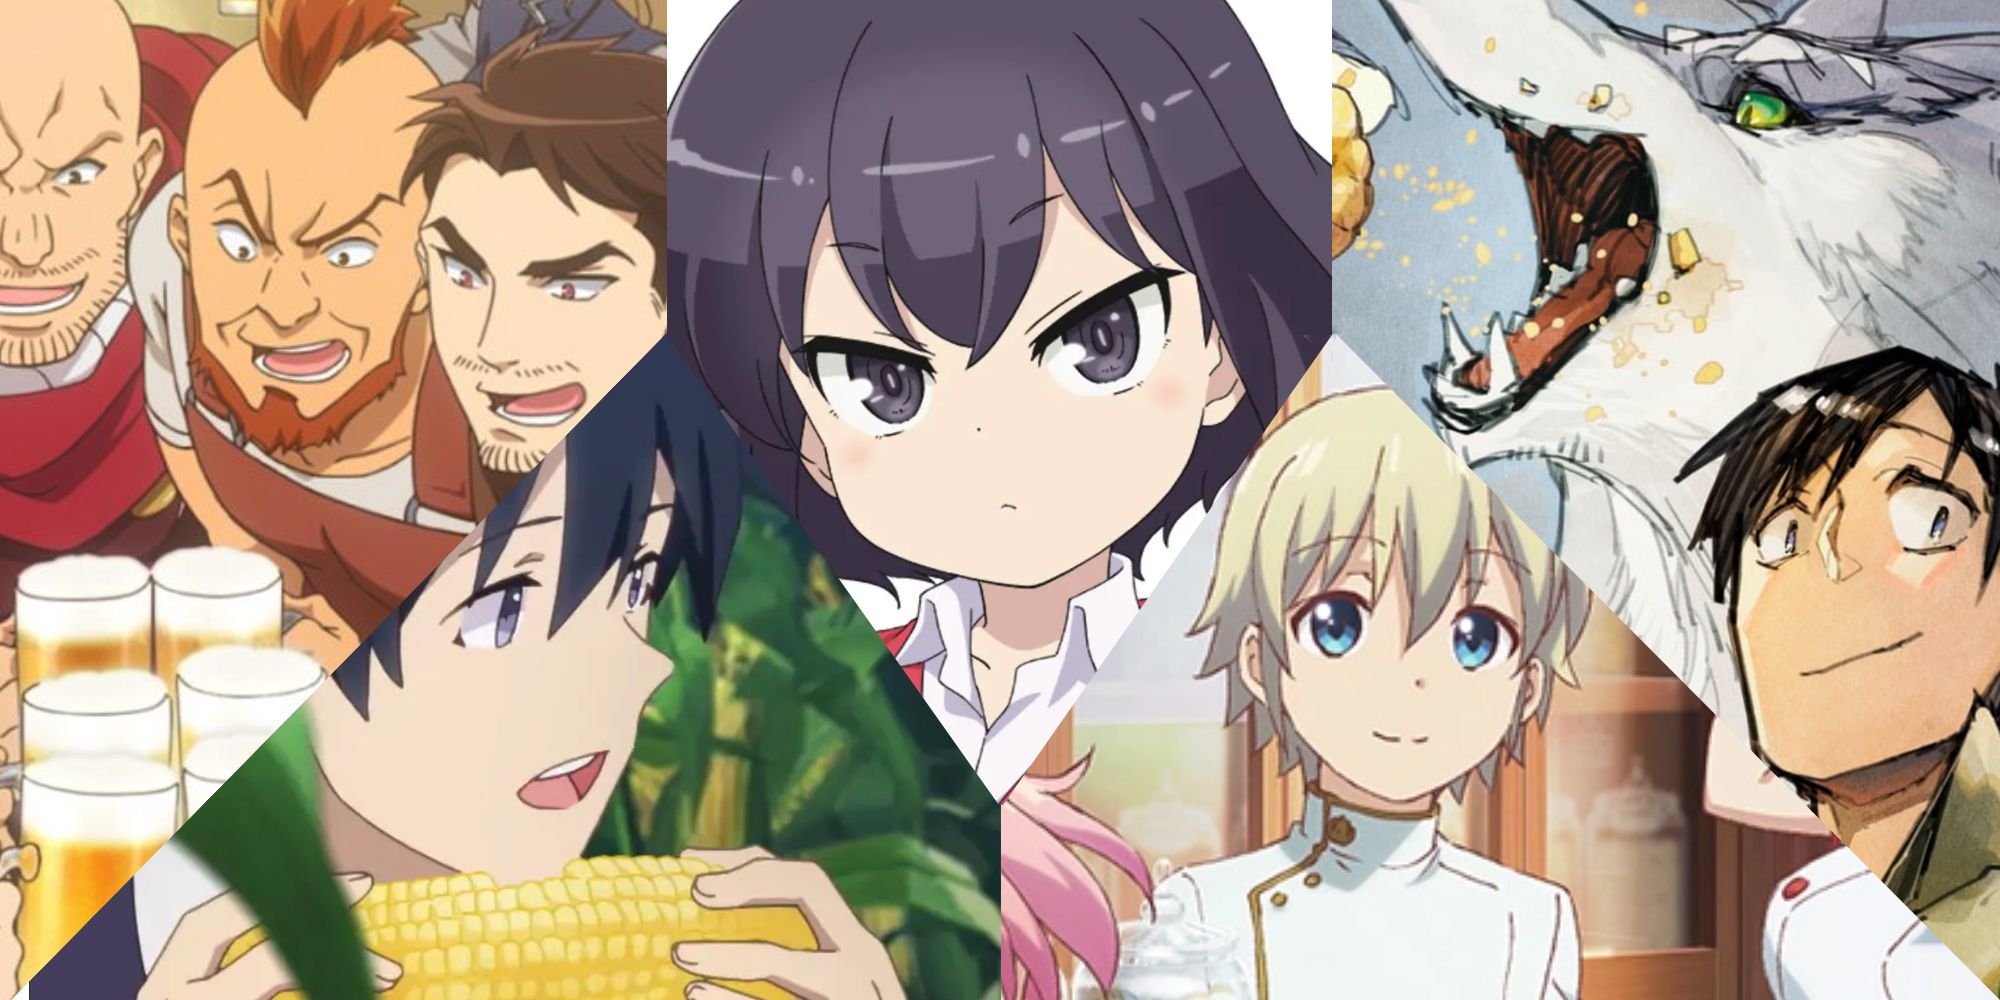 40 Must-Watch Anime Series You Should Be Binge-Watching Right Now